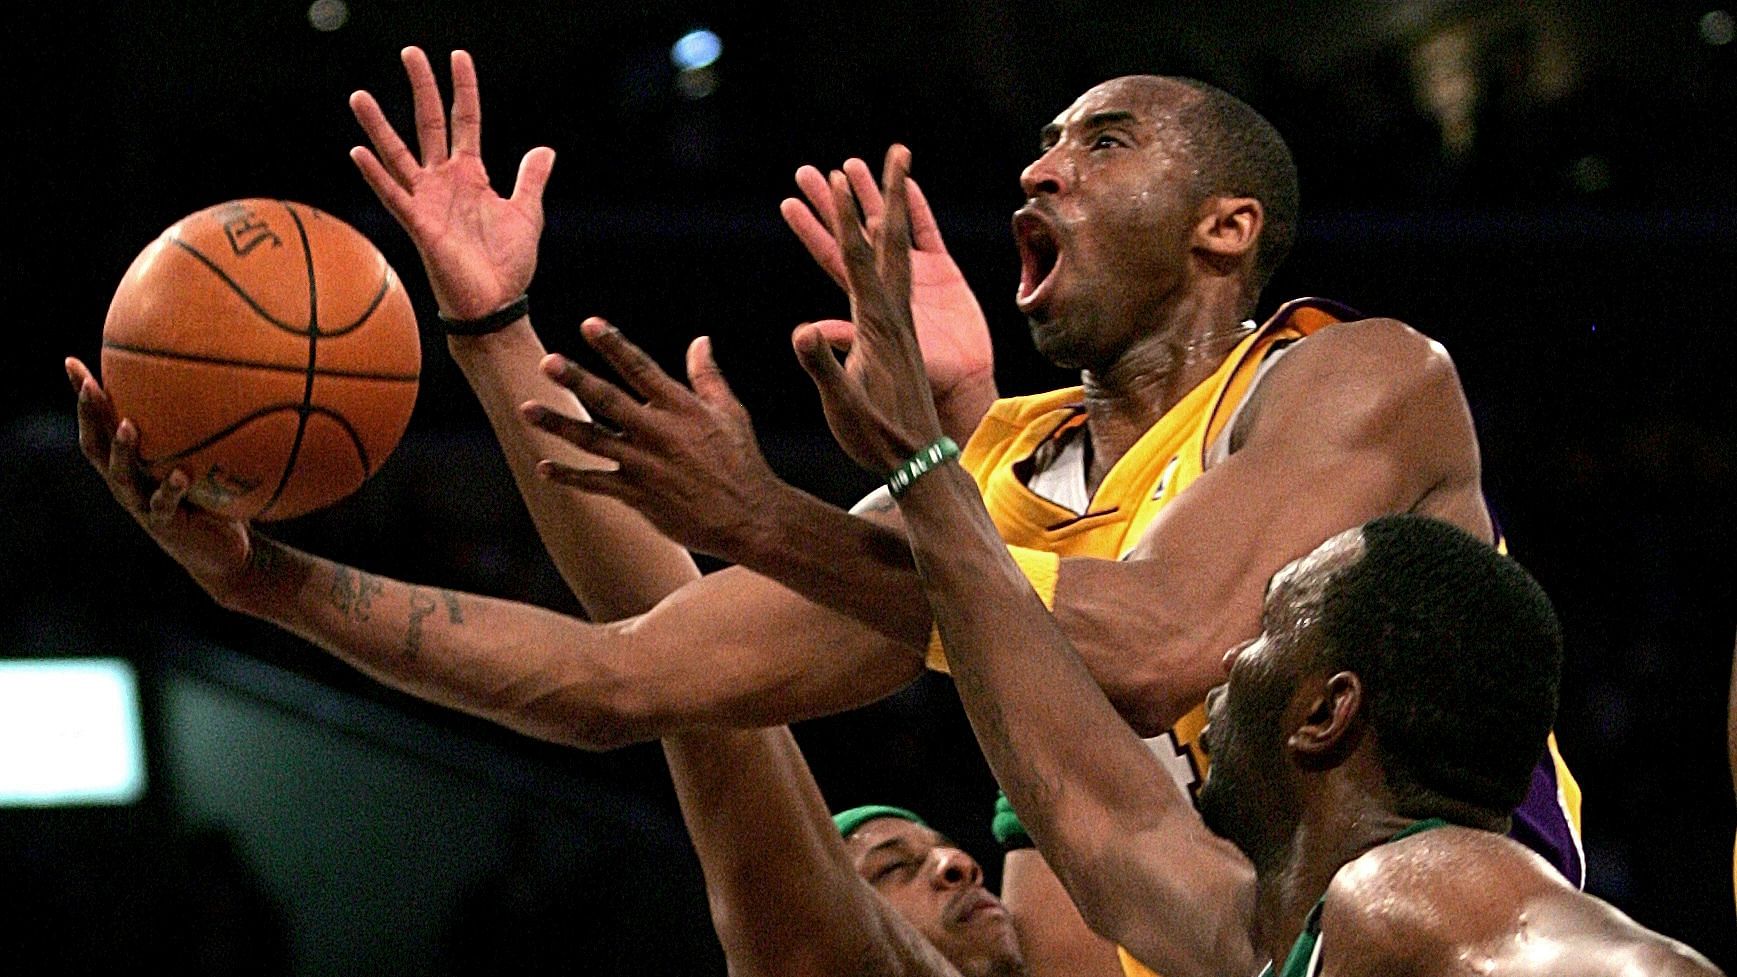 Kobe Bryant scored 33,643 points, grabbed 7,047 rebounds and passed off 6,306 assists over 1,346 career NBA games.